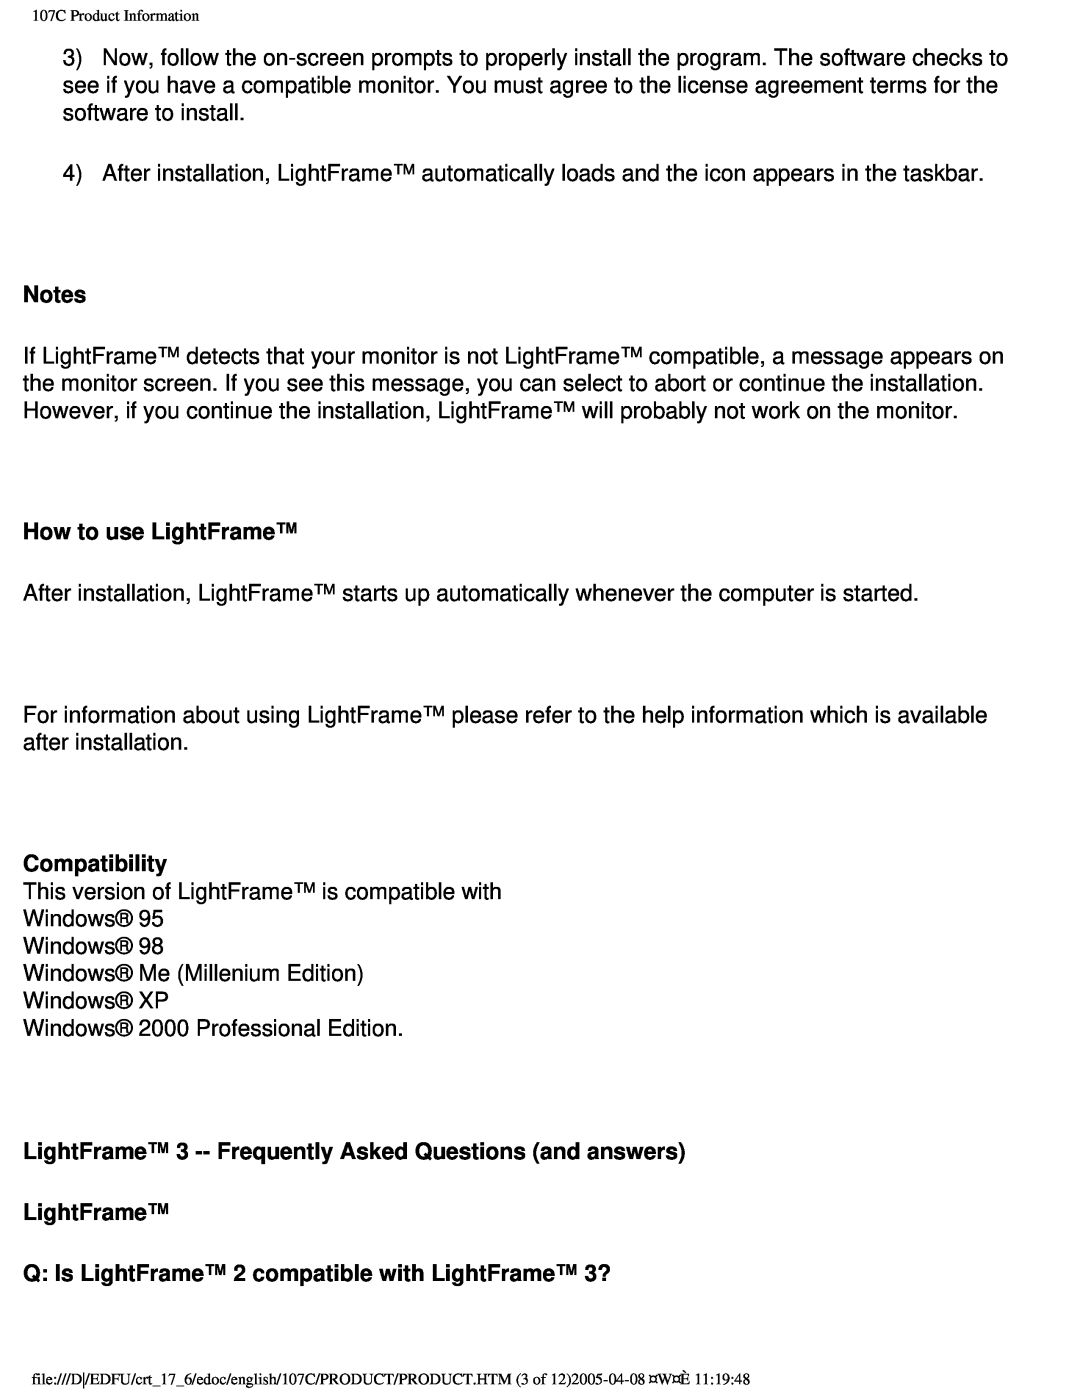 Philips 107C65 user manual Notes, How to use LightFrame, Compatibility, Q: Is LightFrame 2 compatible with LightFrame 3? 